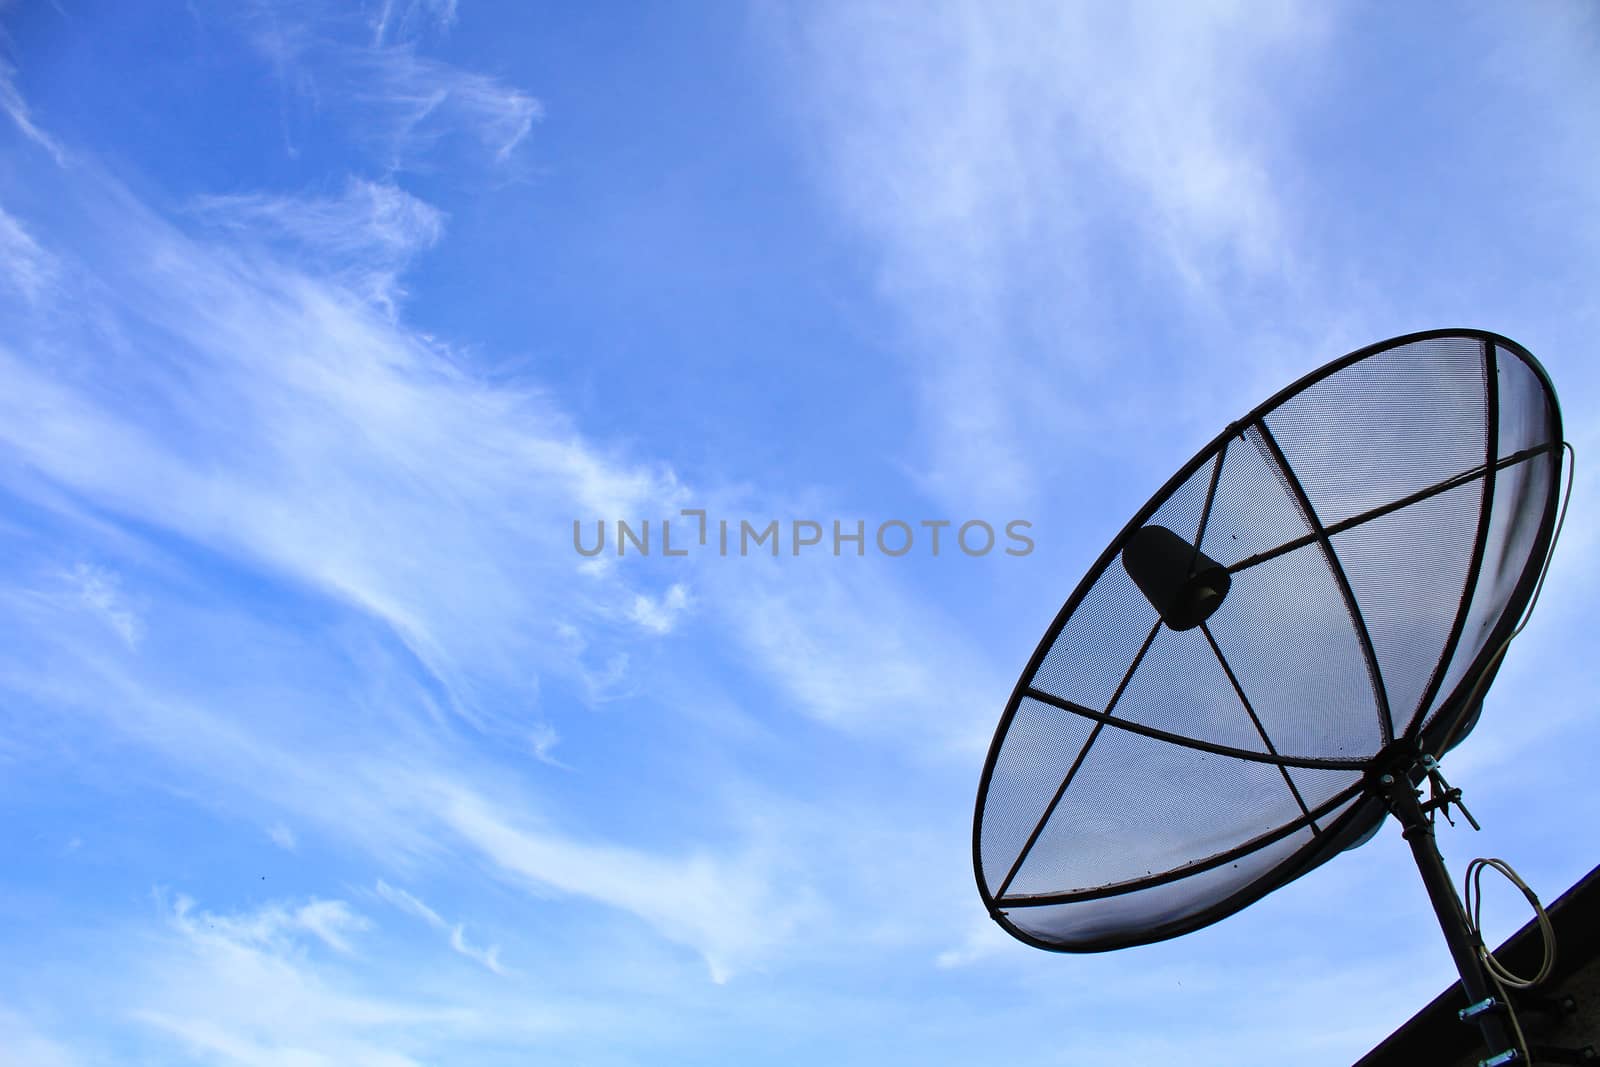 A satellite dish on the roof of the house with the blue sky.